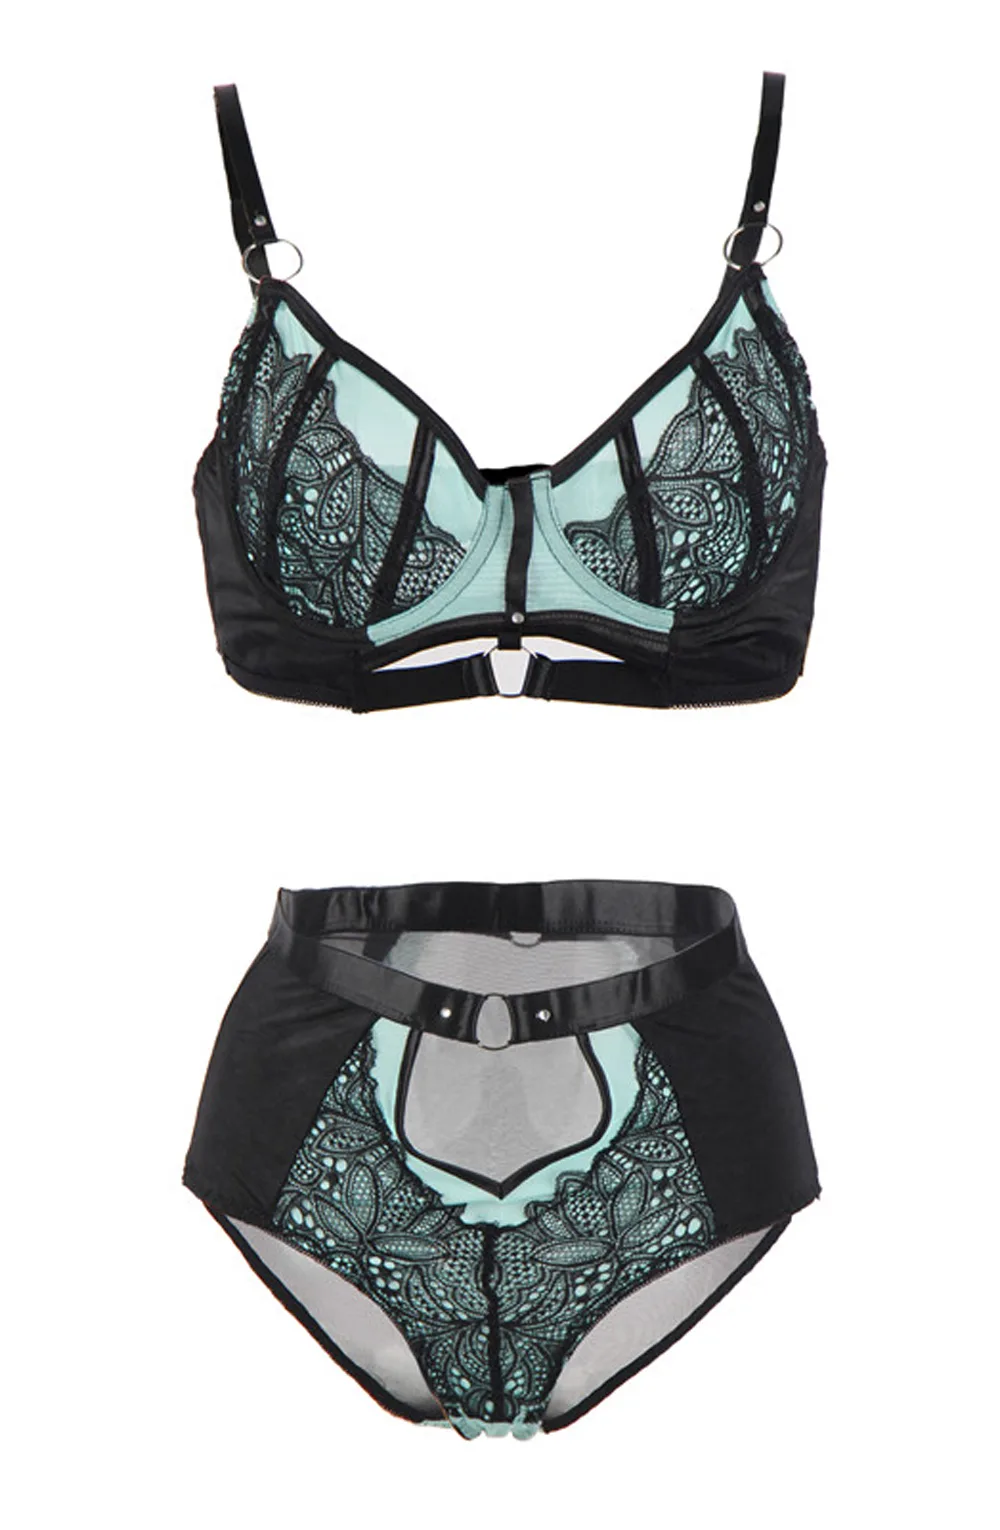 image 2 of YesX YX830 Blue Lace Bra and Brief Set - Sexy Lingerie for Women